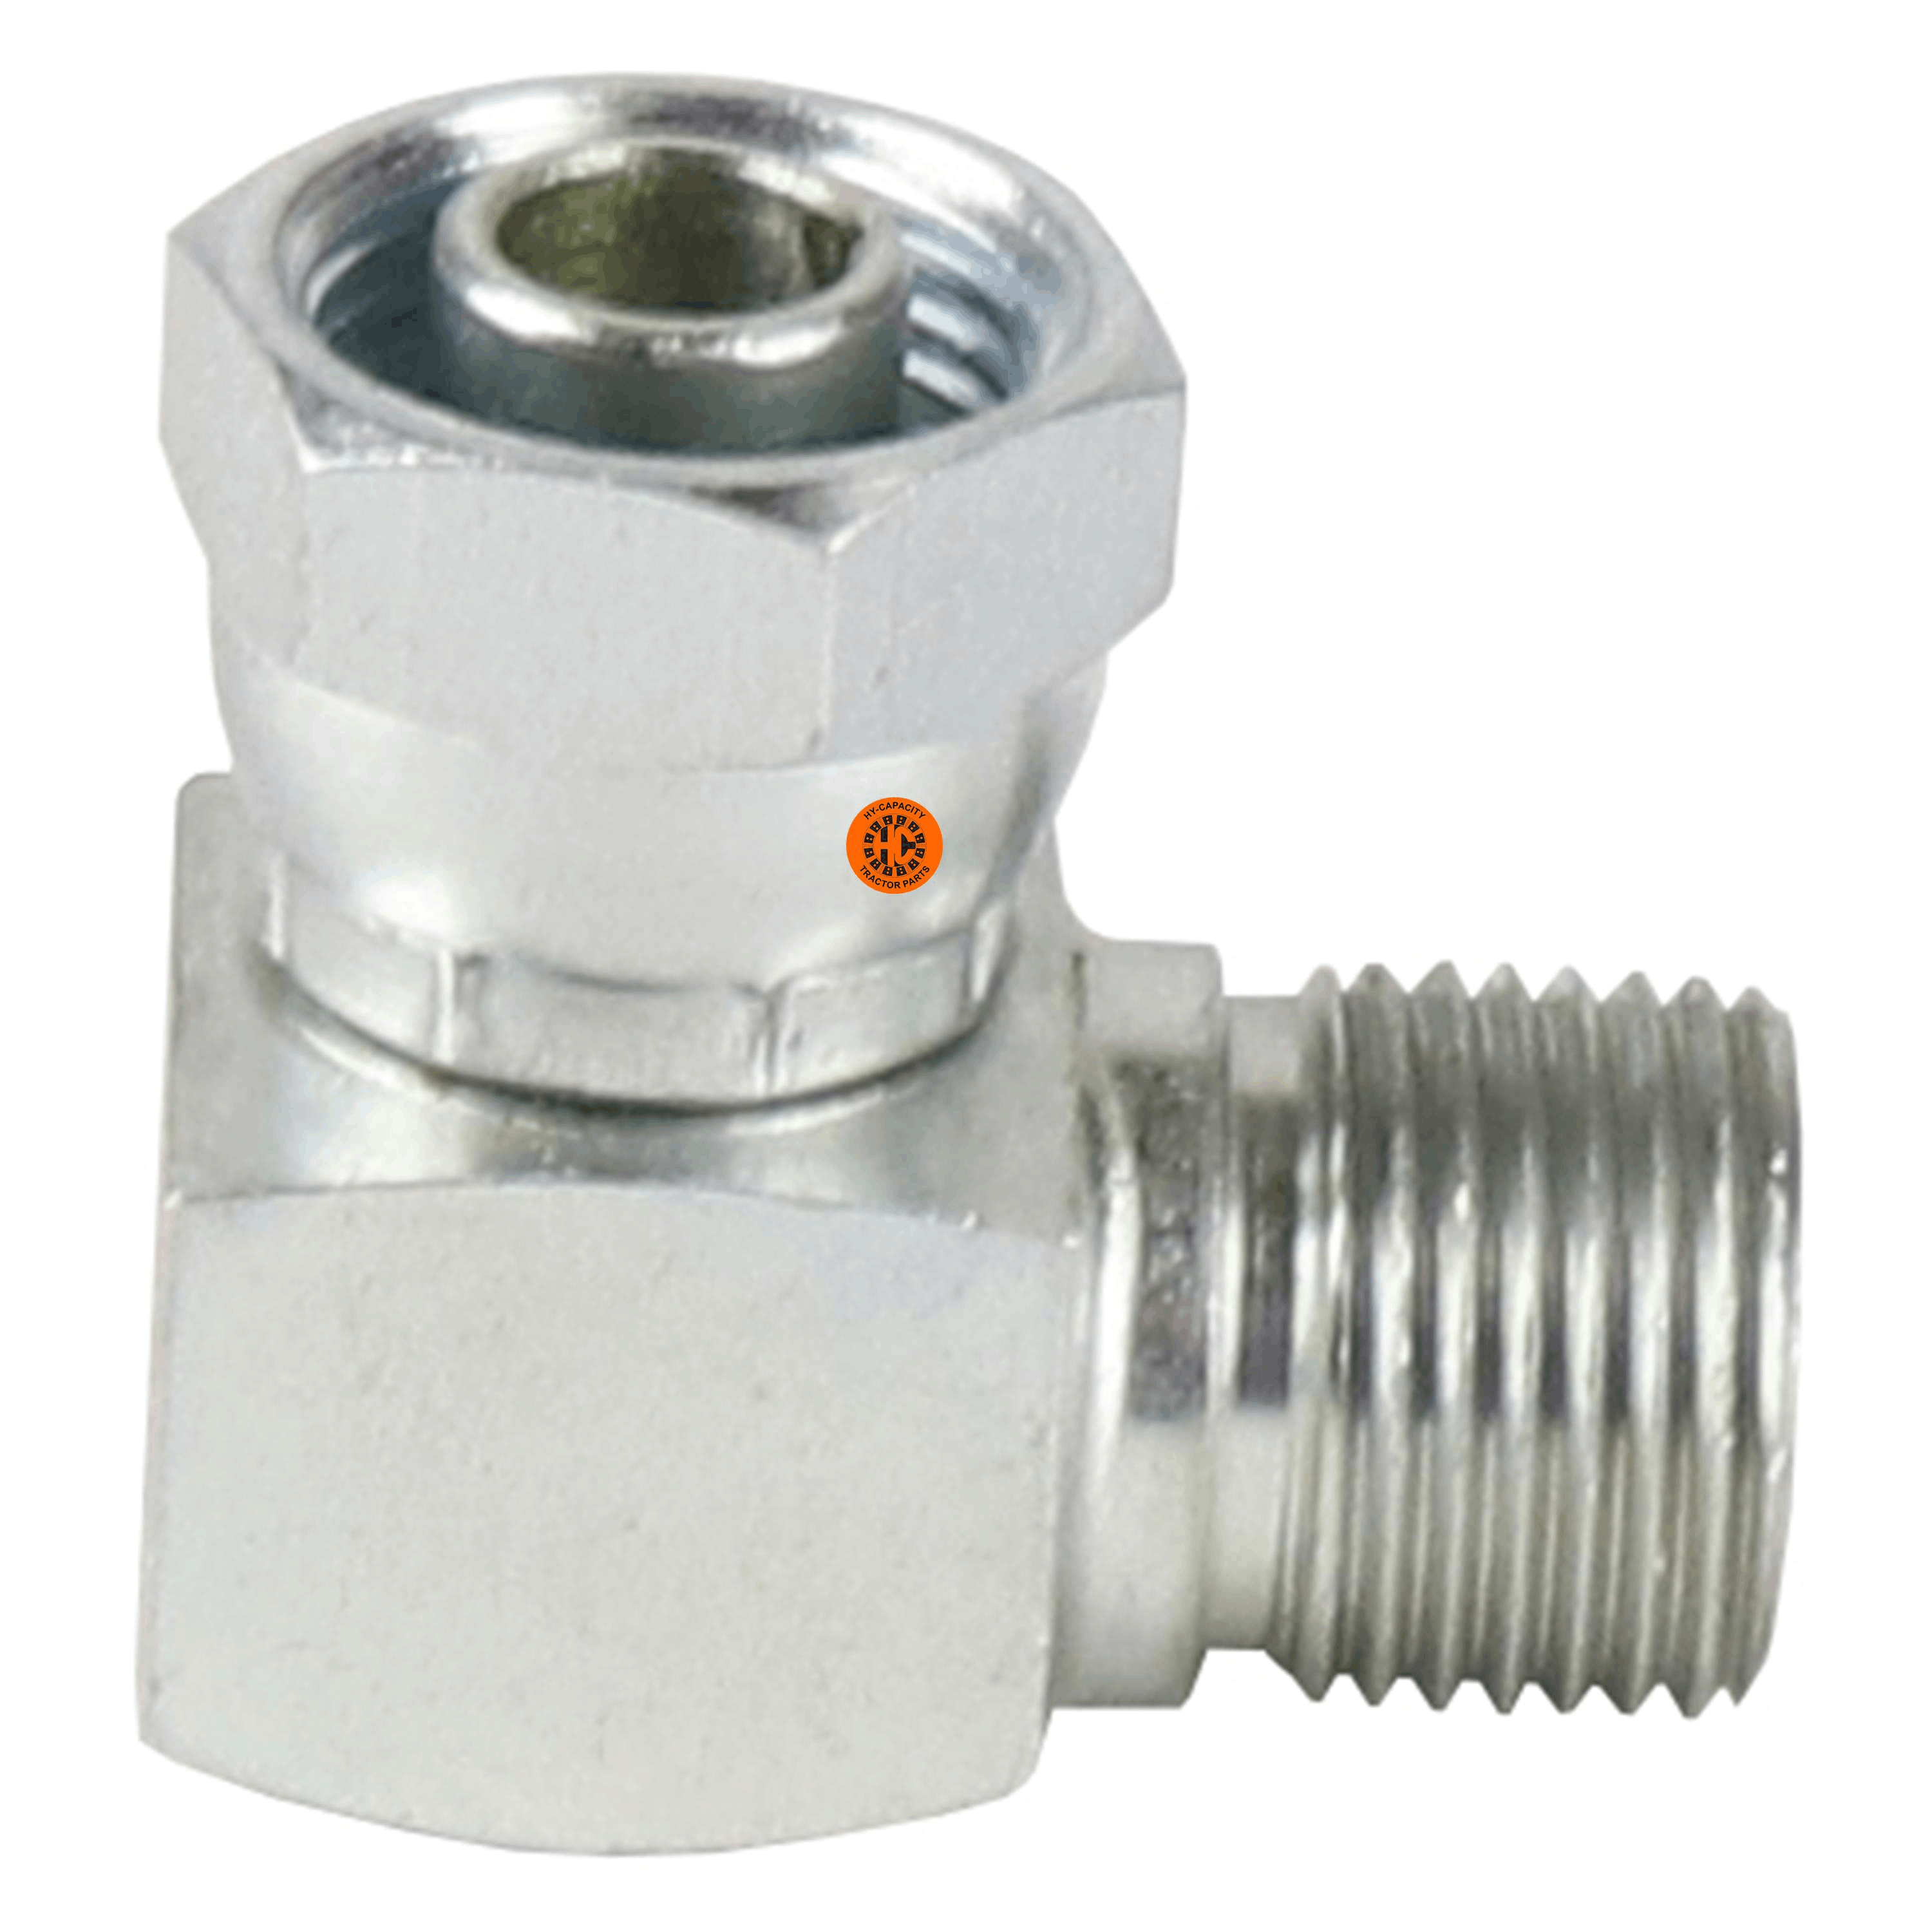 Female to Male O-Ring Adapter, #8 (3/4″), 90 Degree – 8813275